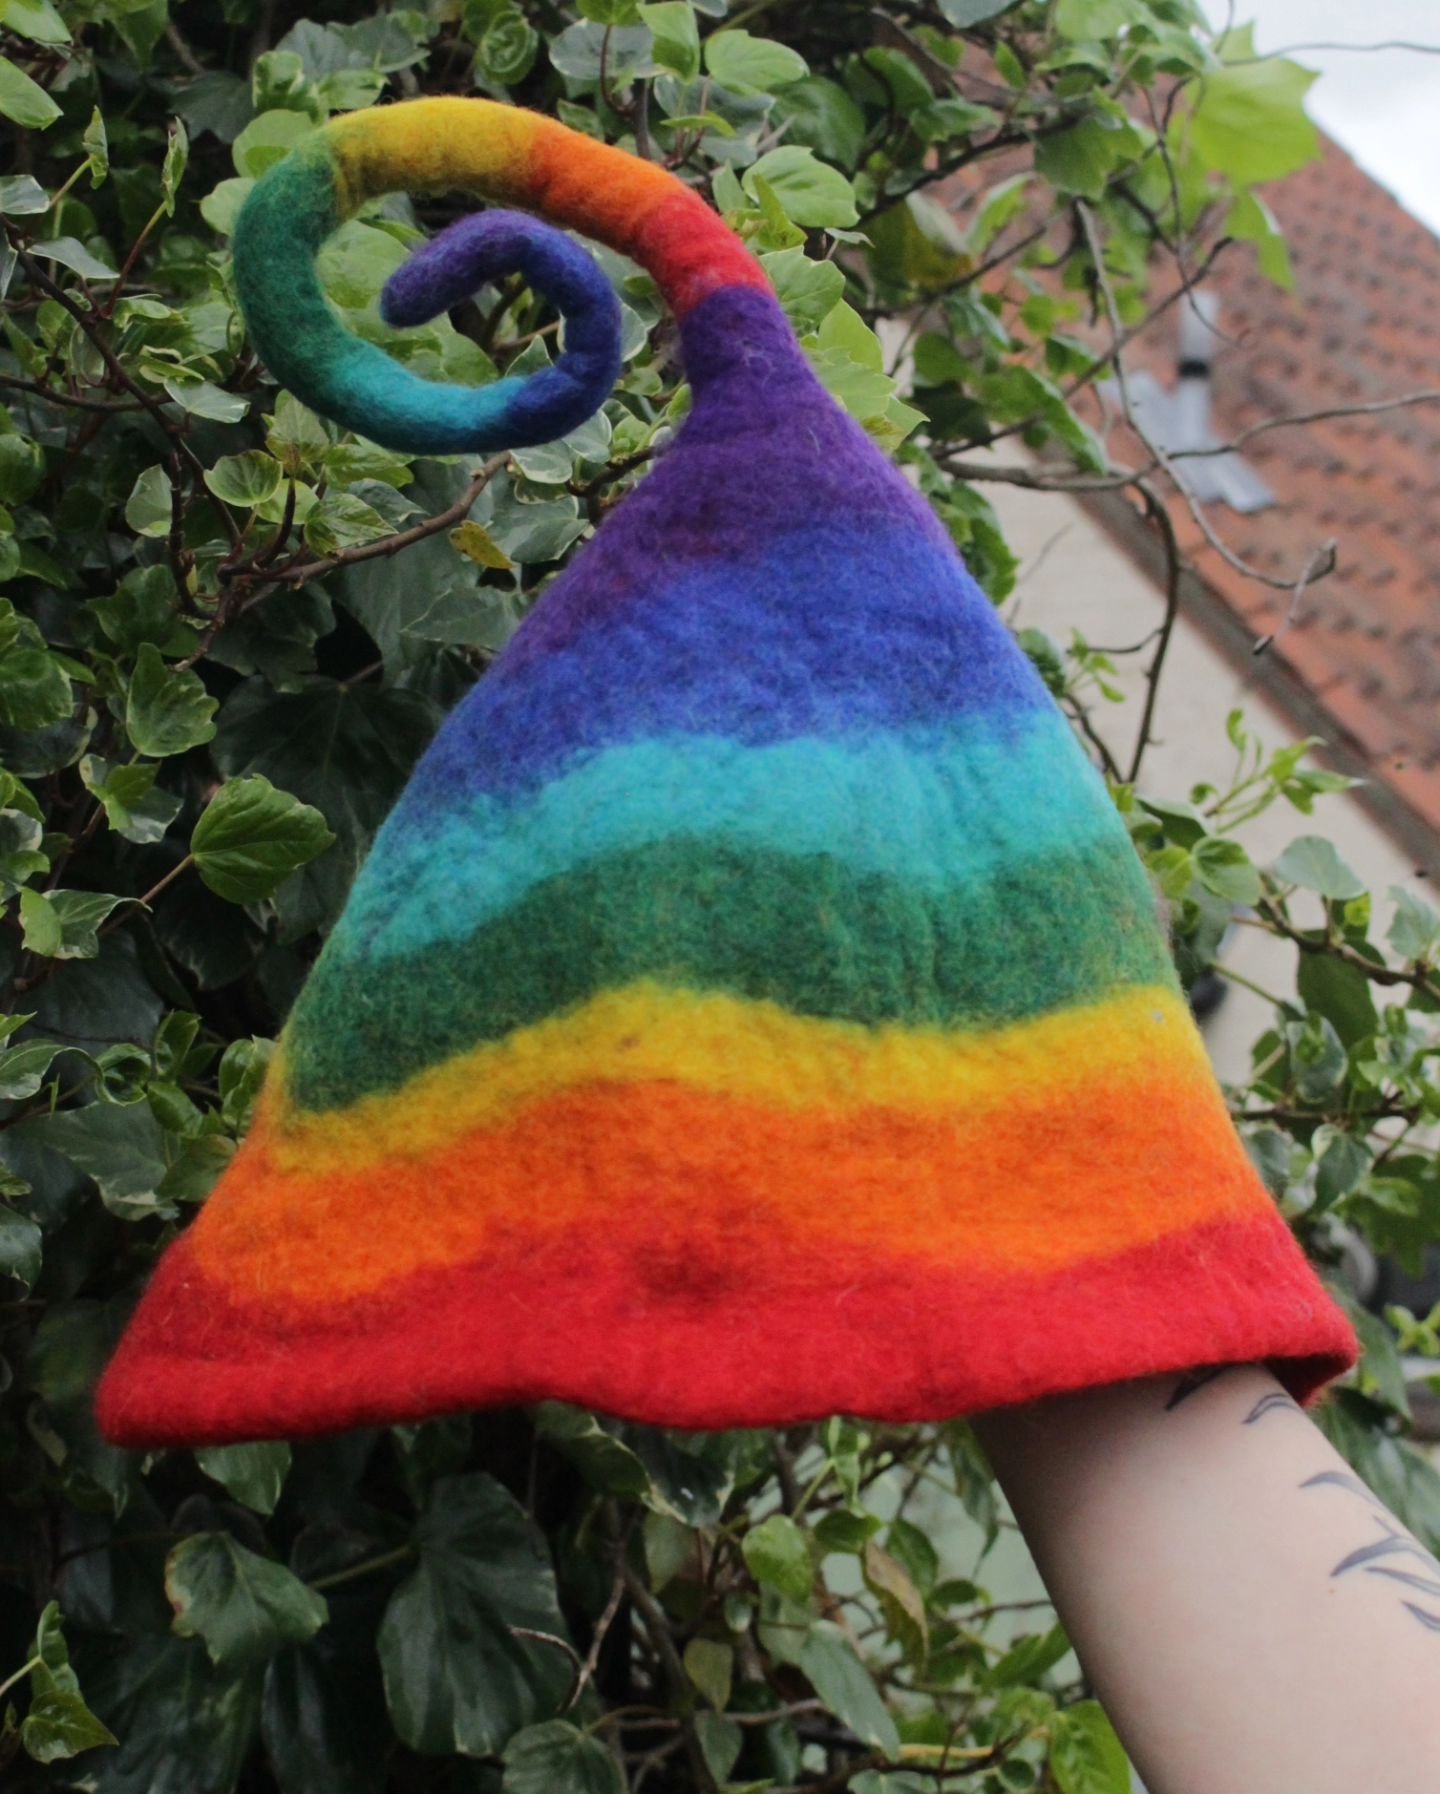 our sweet felt hats are so joyous 🍄🌈 

&pound;25 each 

🌥 website 
www.theheadintheclouds.co.uk